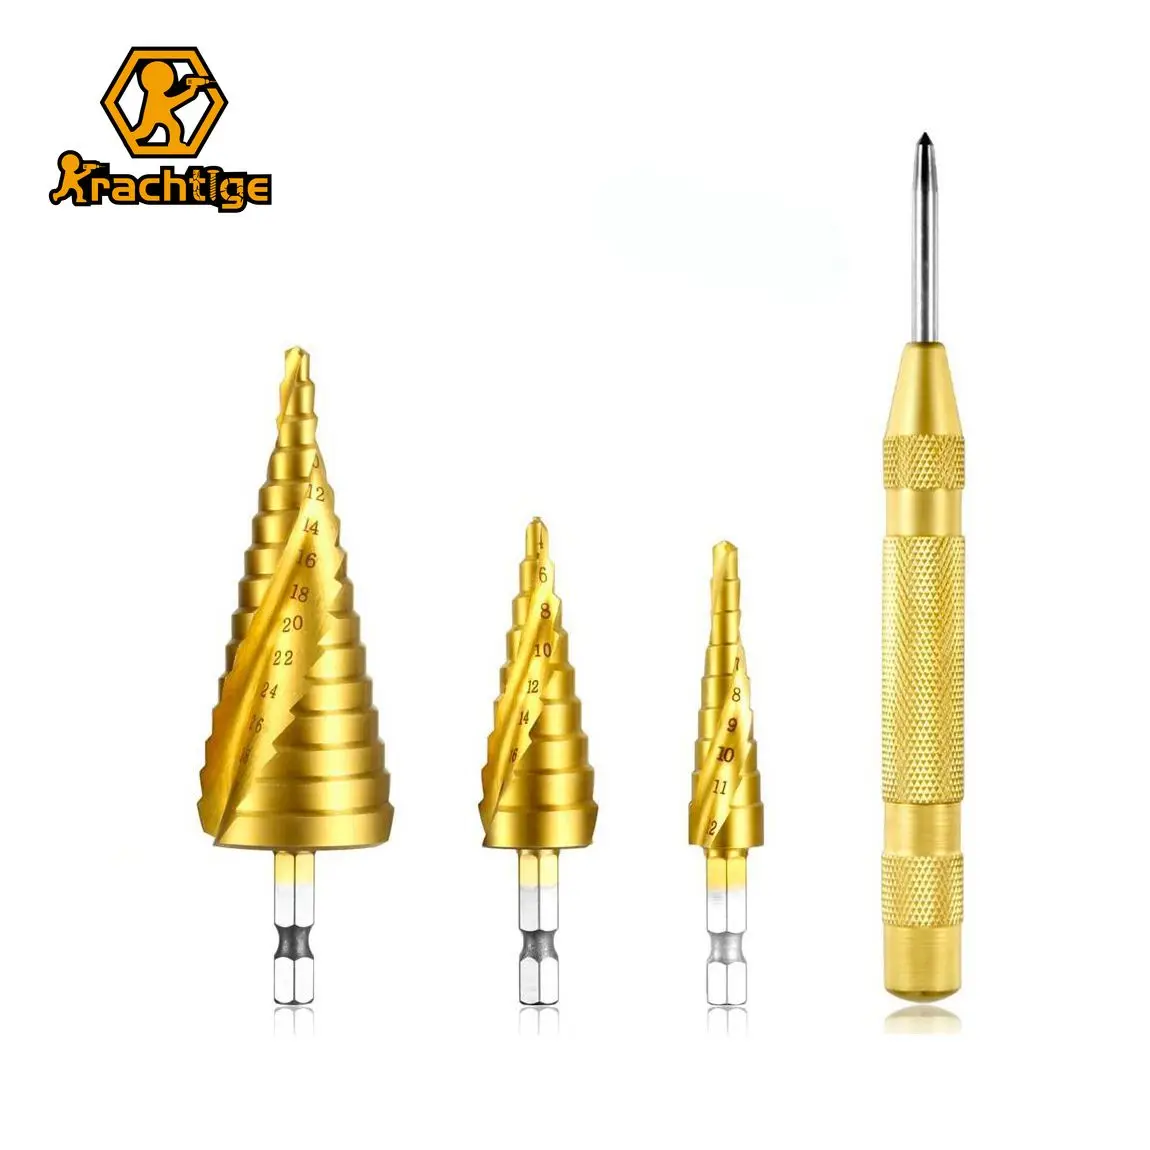 Krachtige 3pcs Hex Shank Titanium Step Drill Bit Set with Automatic Center Punch For Metal Wood Tool